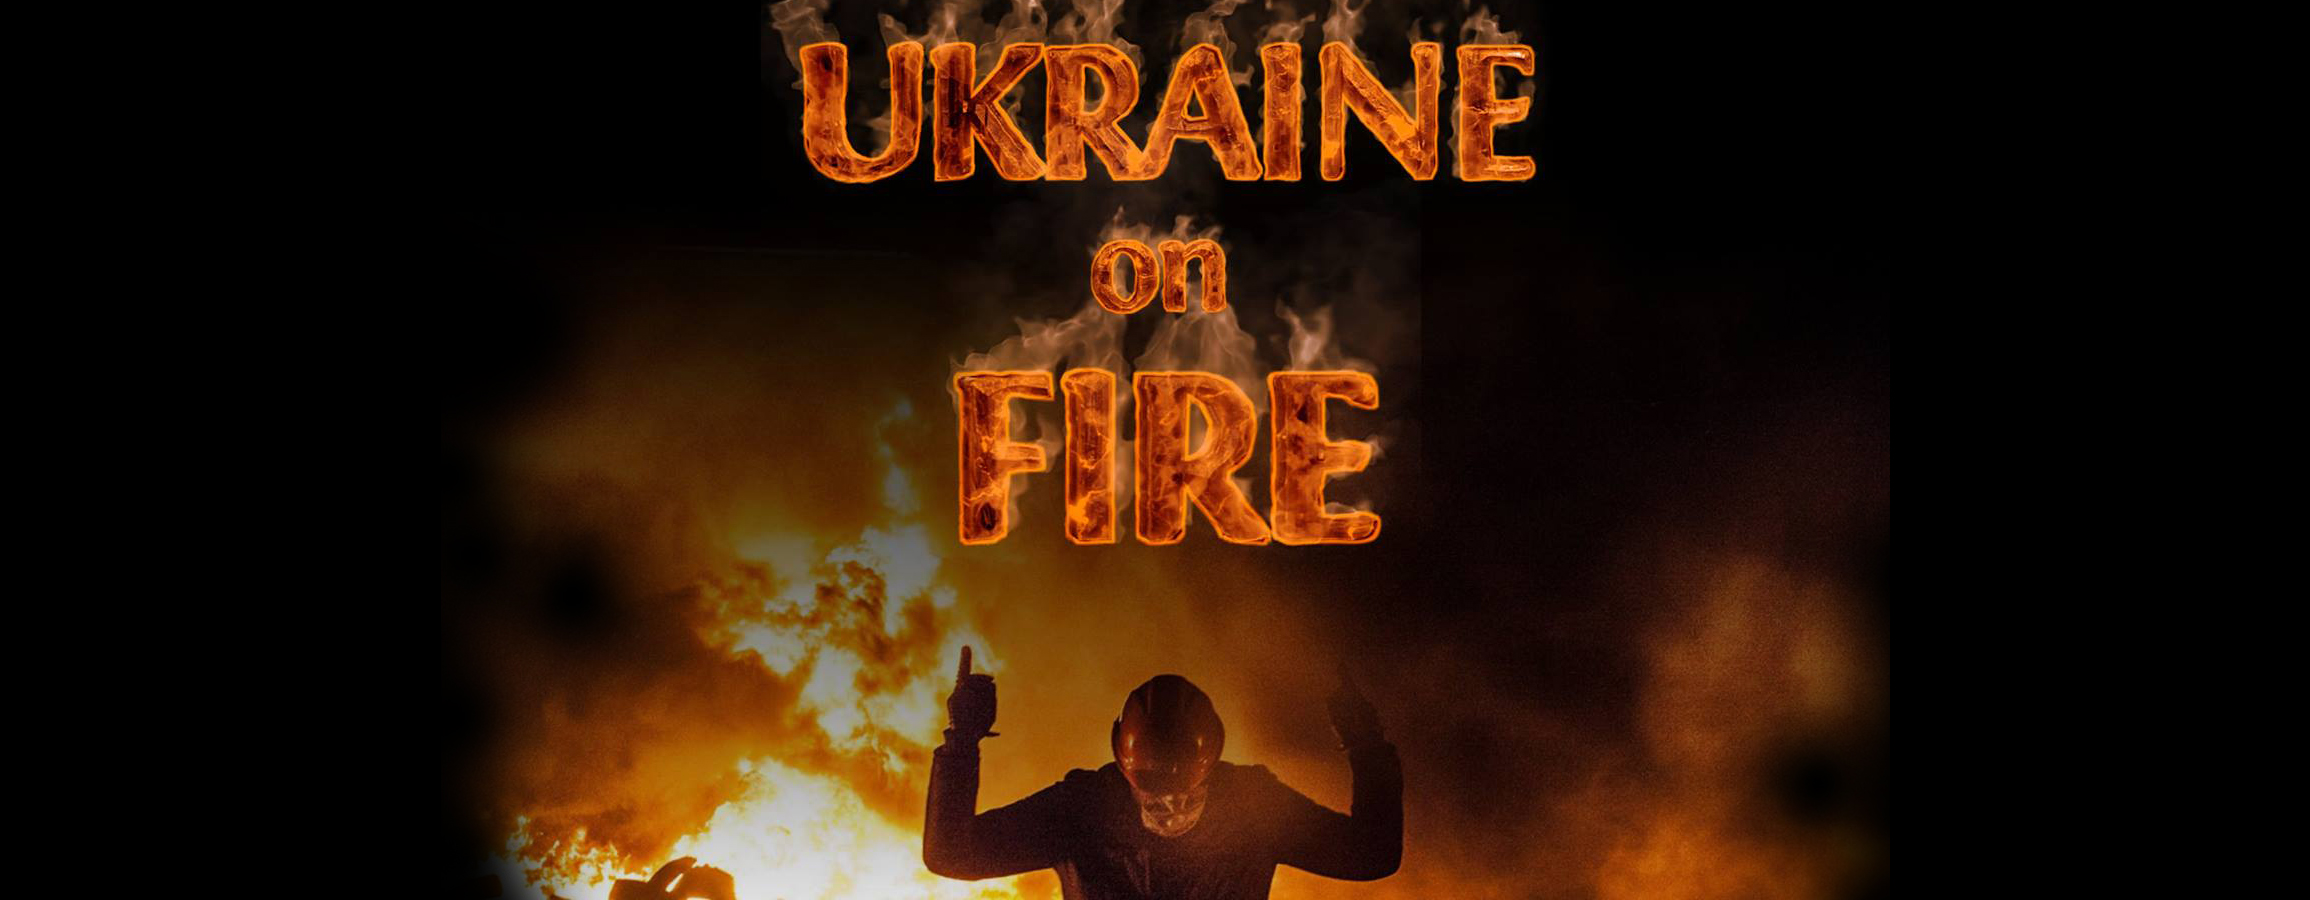 FULL LENGTH FILM ” UKRAINE ON FIRE ” BY OLIVER STONE , AMERICAS BLOODY INVOLVEMENT AND THE CIA TIES WITH NAZI ELEMENTS OF UKRAINE’S PAST AND PRESENT ( VIDEO FILM)